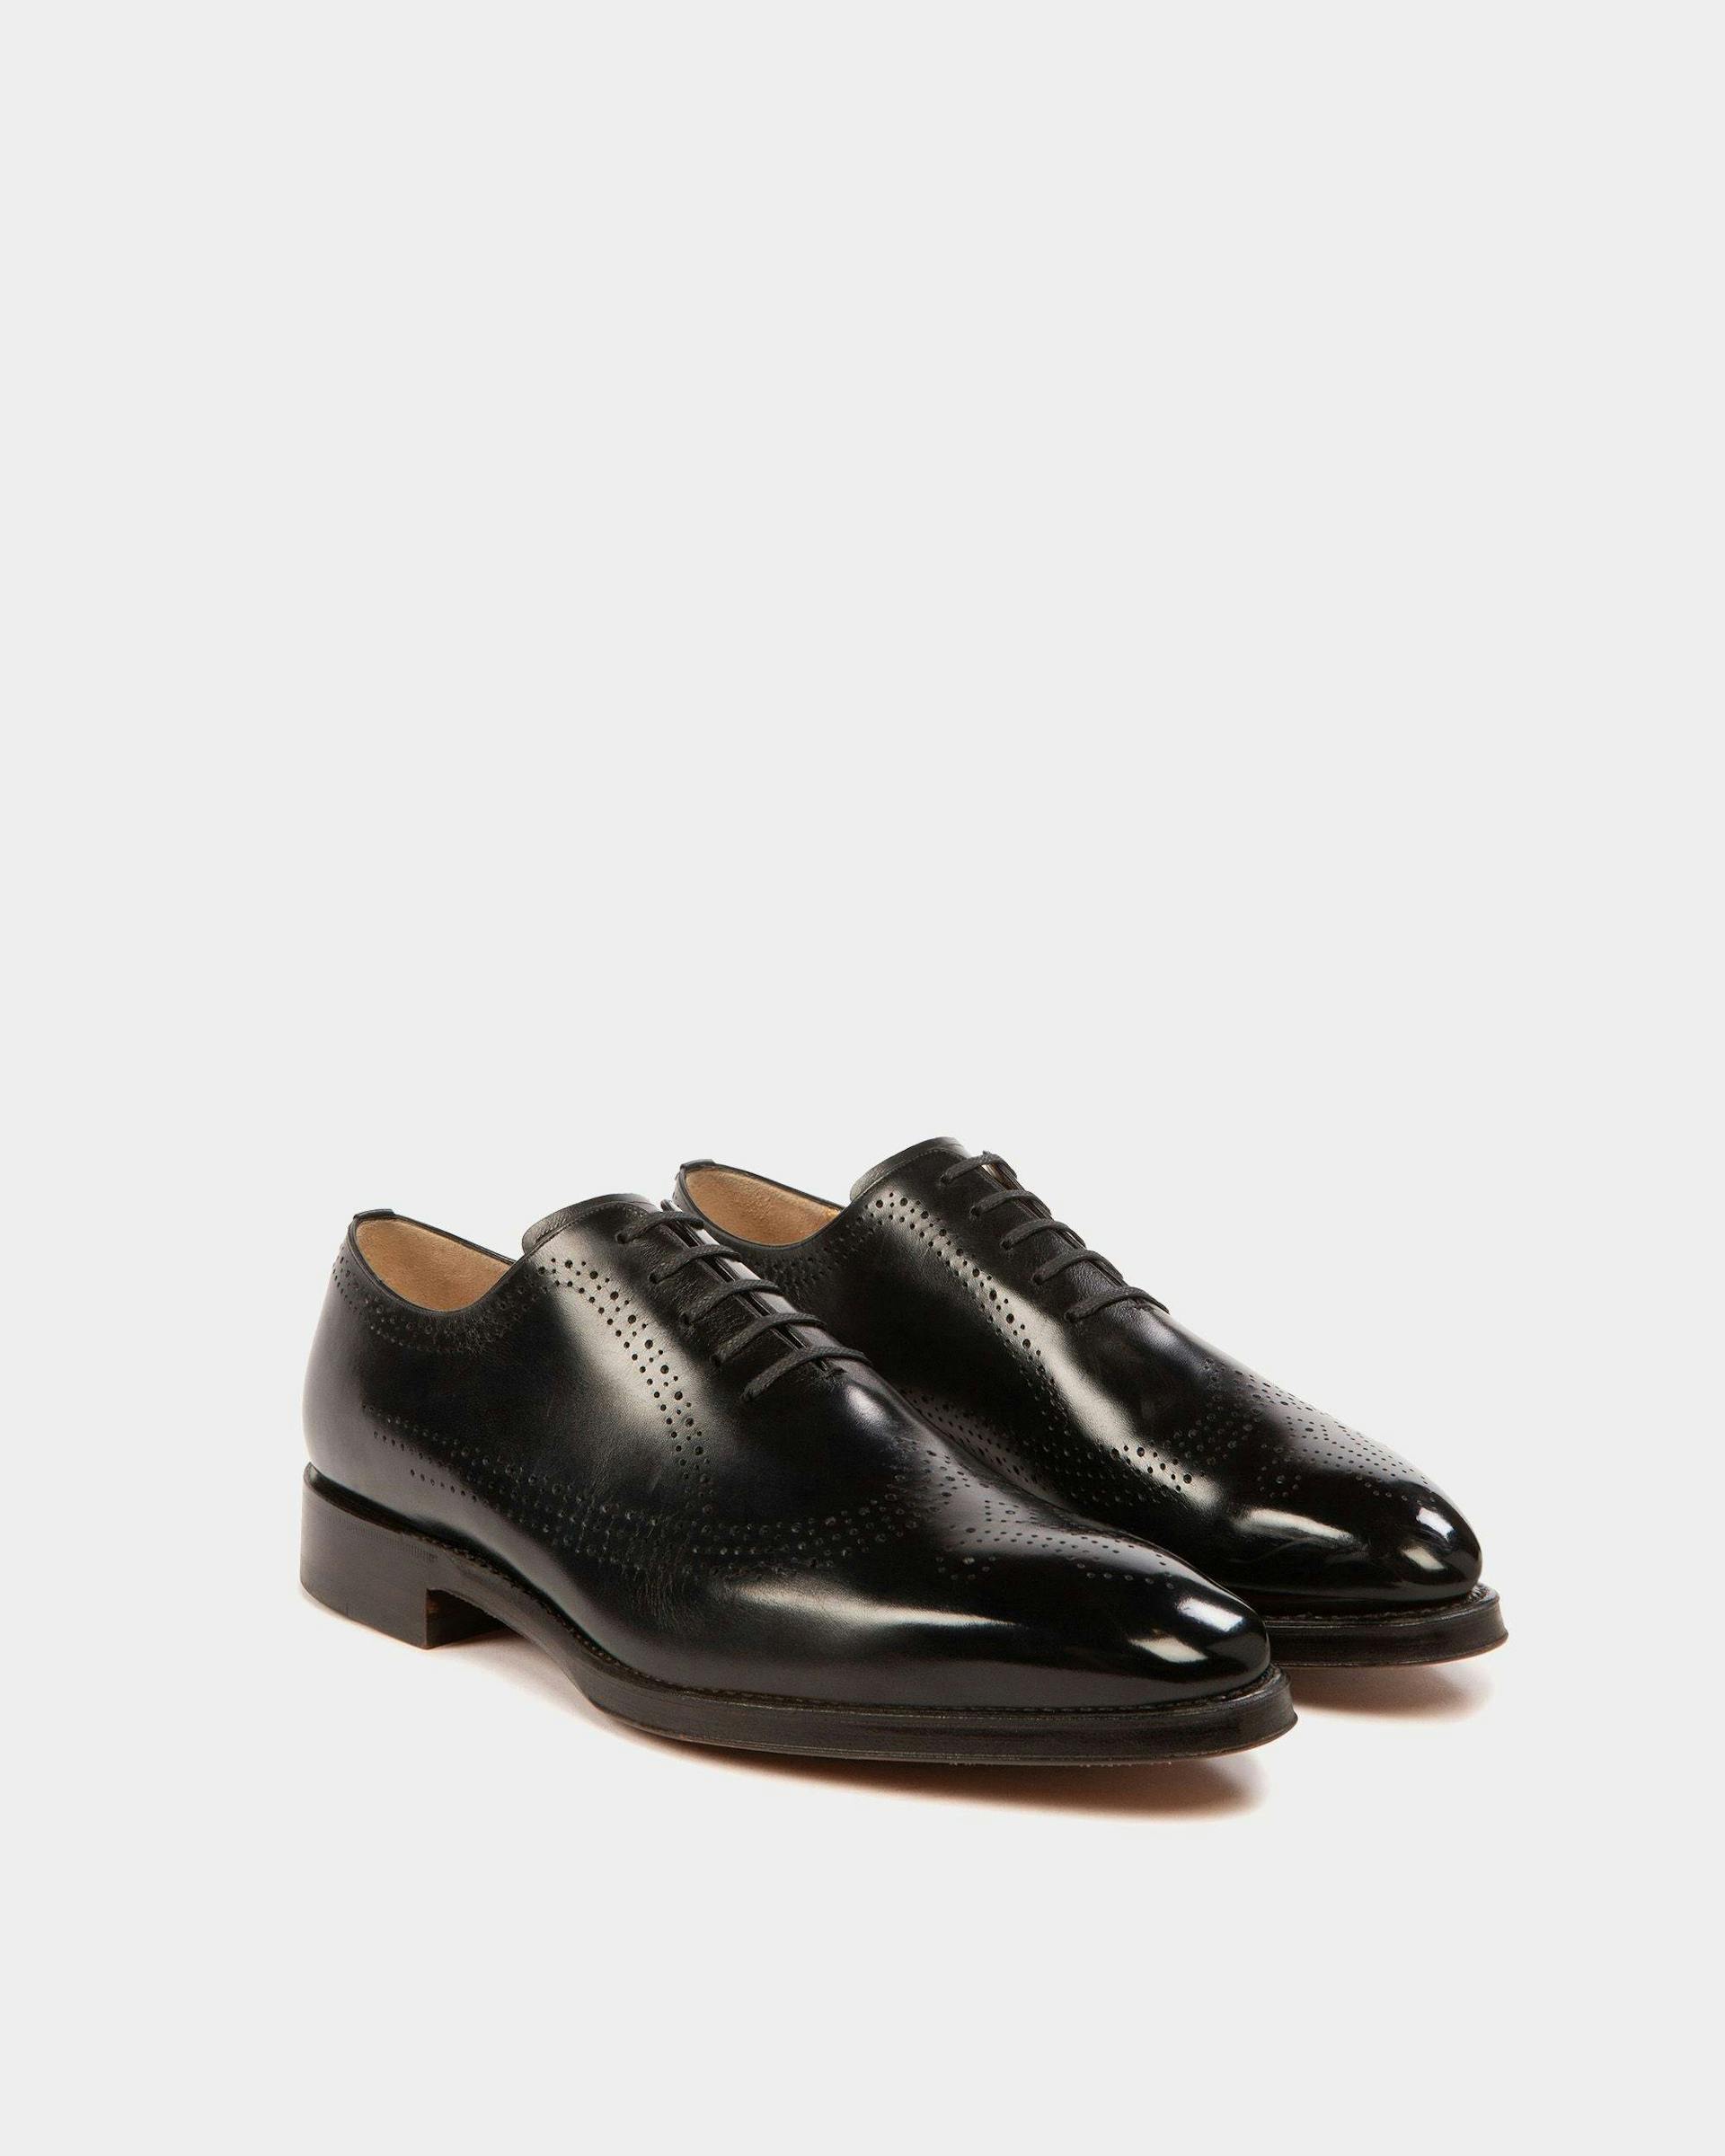 Oxford Shoes In Black Leather - Men's - Bally - 03